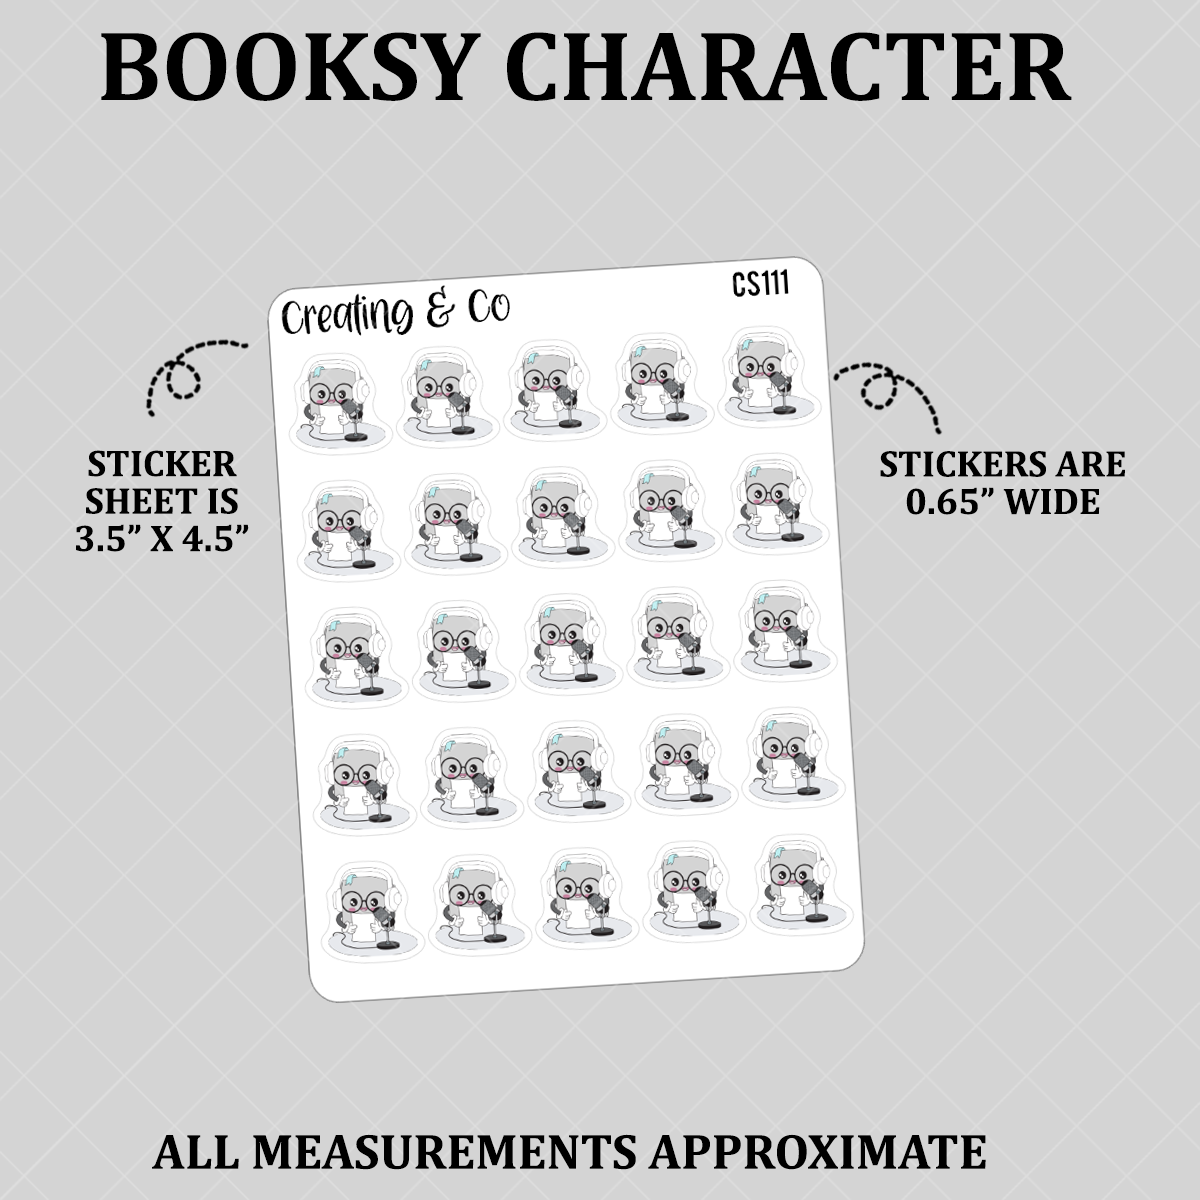 Podcast Recording Voiceover Booksy Character Functional Stickers - CS111